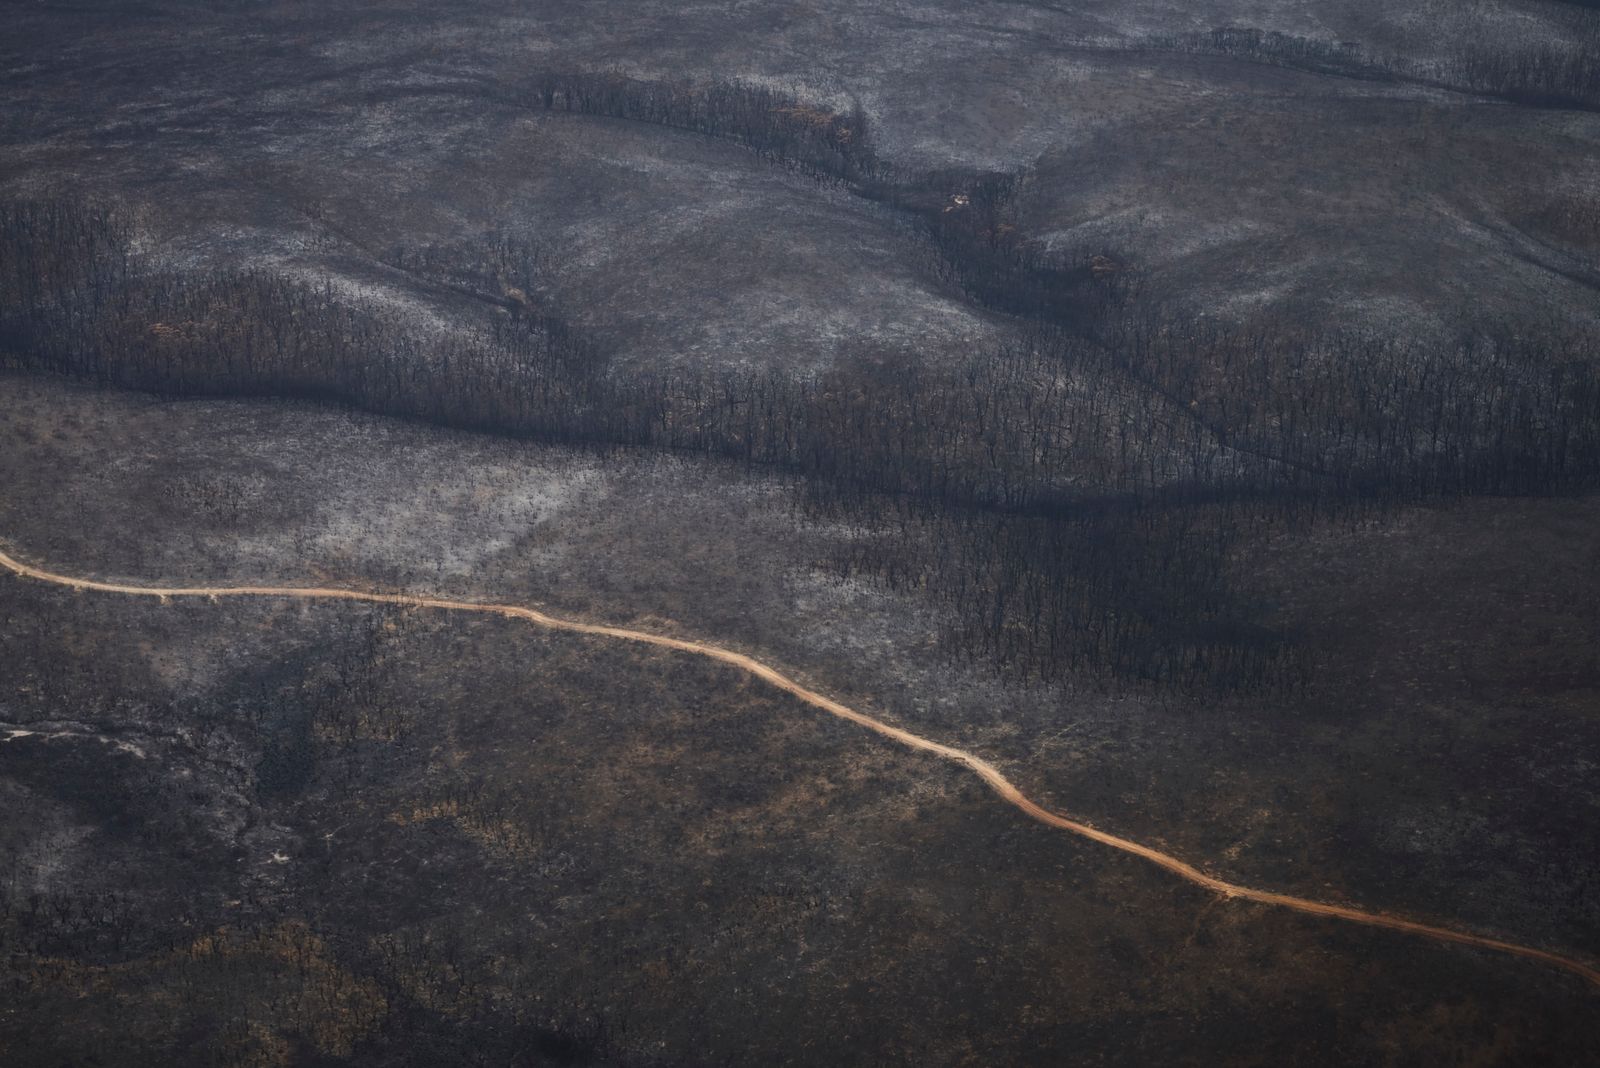 © Christina Simons - Image from the Australian Apocalypse: The Consequences of the Australian Bushfires photography project